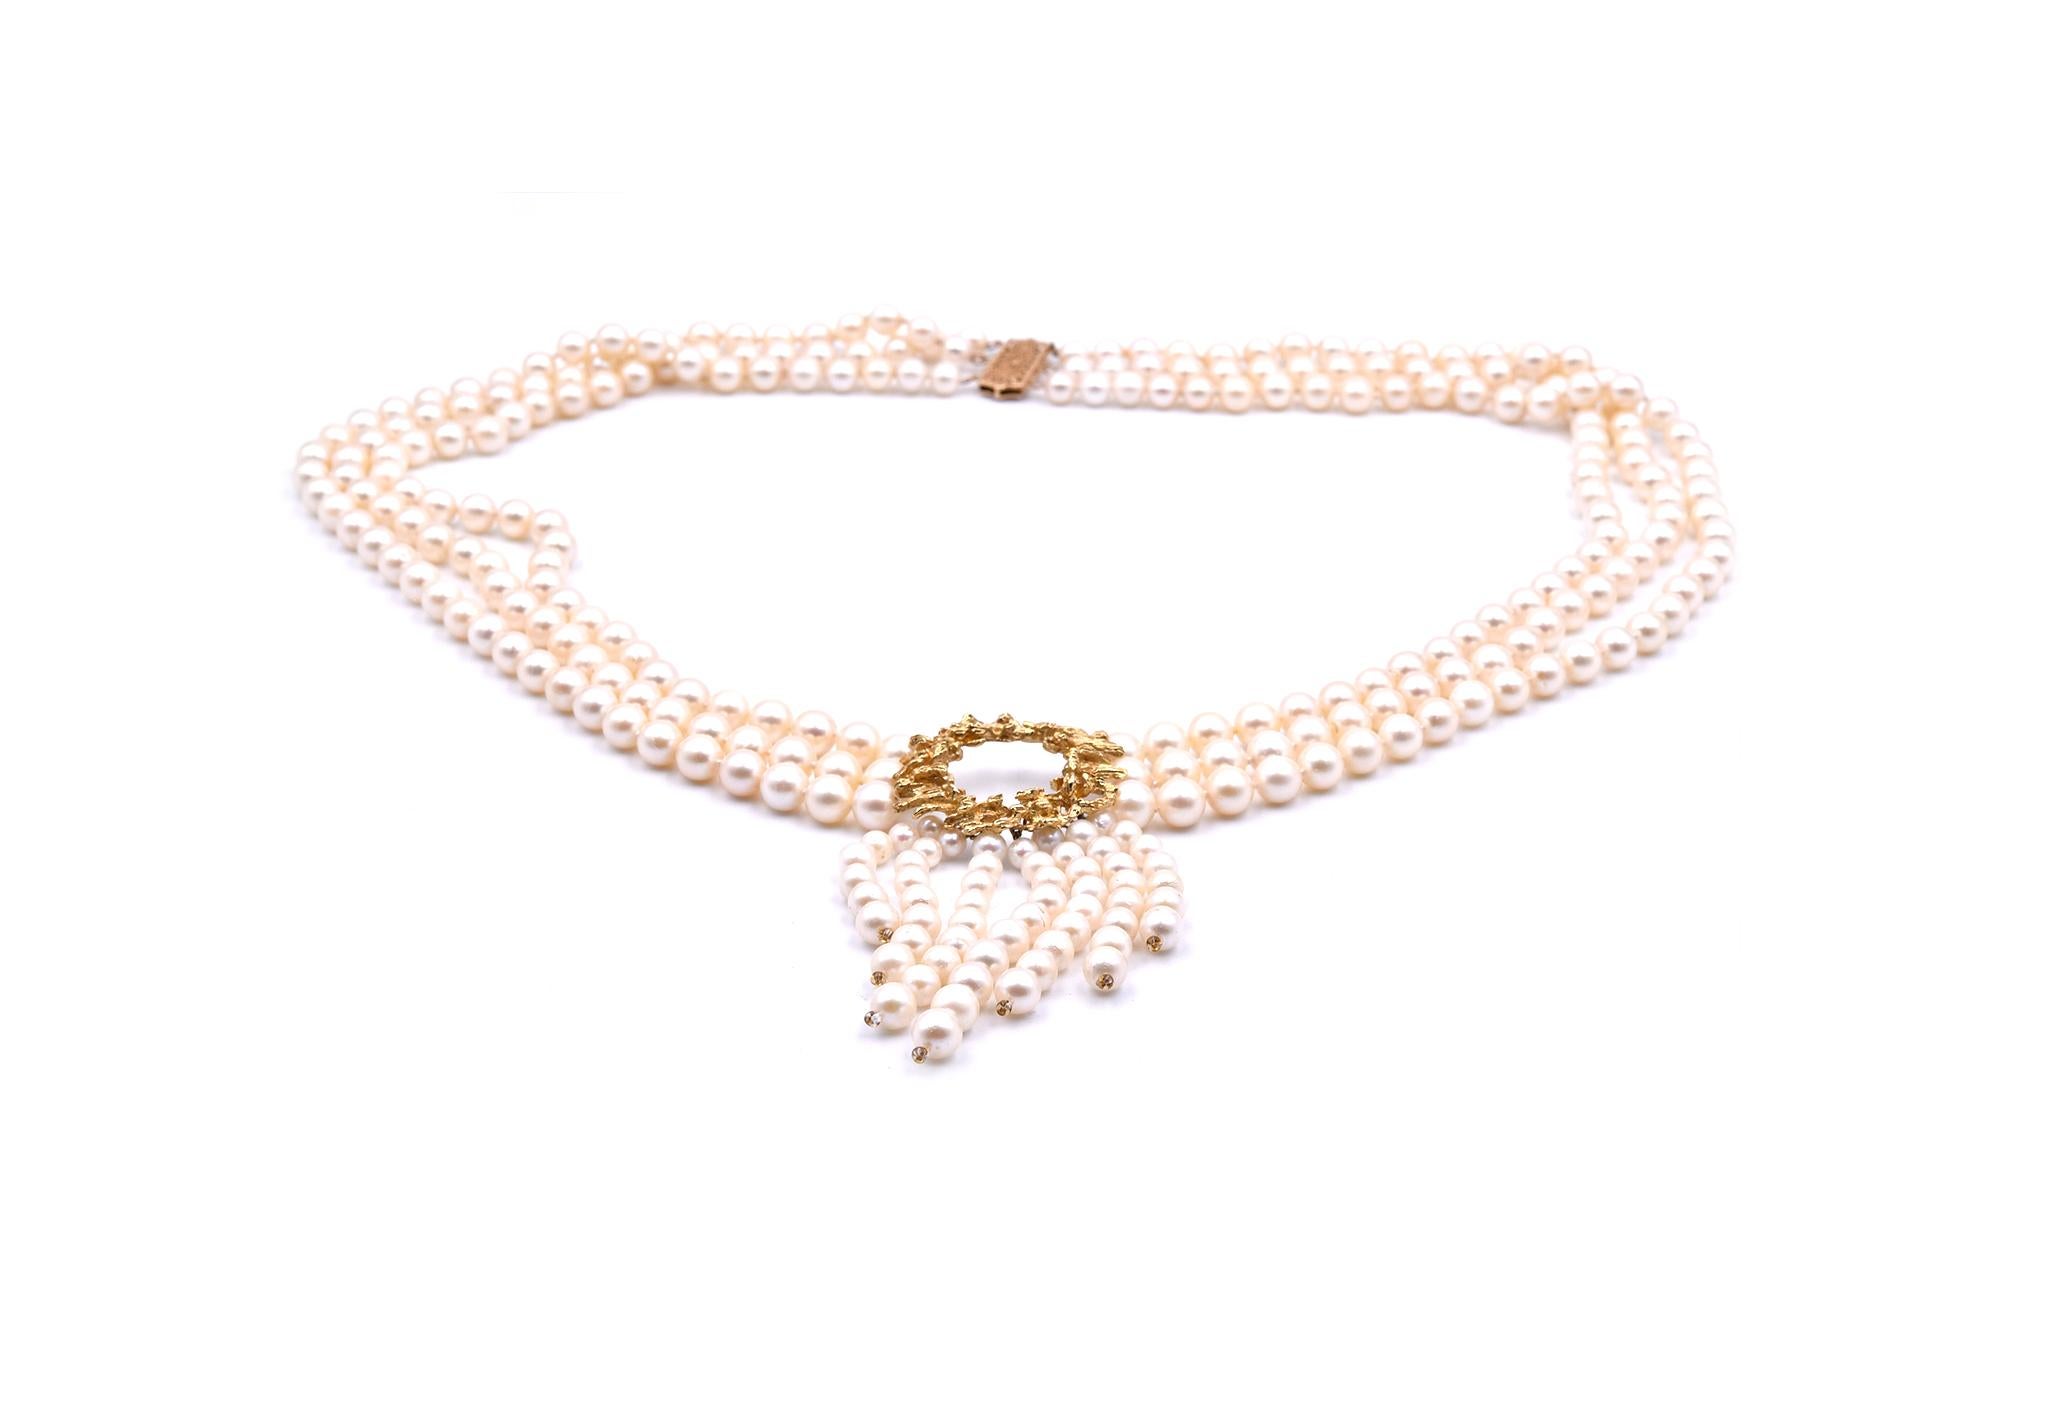 Designer: custom design
Material: 14k yellow gold
Akoya pearl: 6.75-7mm round Akoya cultured pearl
Dimensions: necklace is 30-inch long, gold centerpiece is 37.94mm wide
Weight: 130.04 grams
